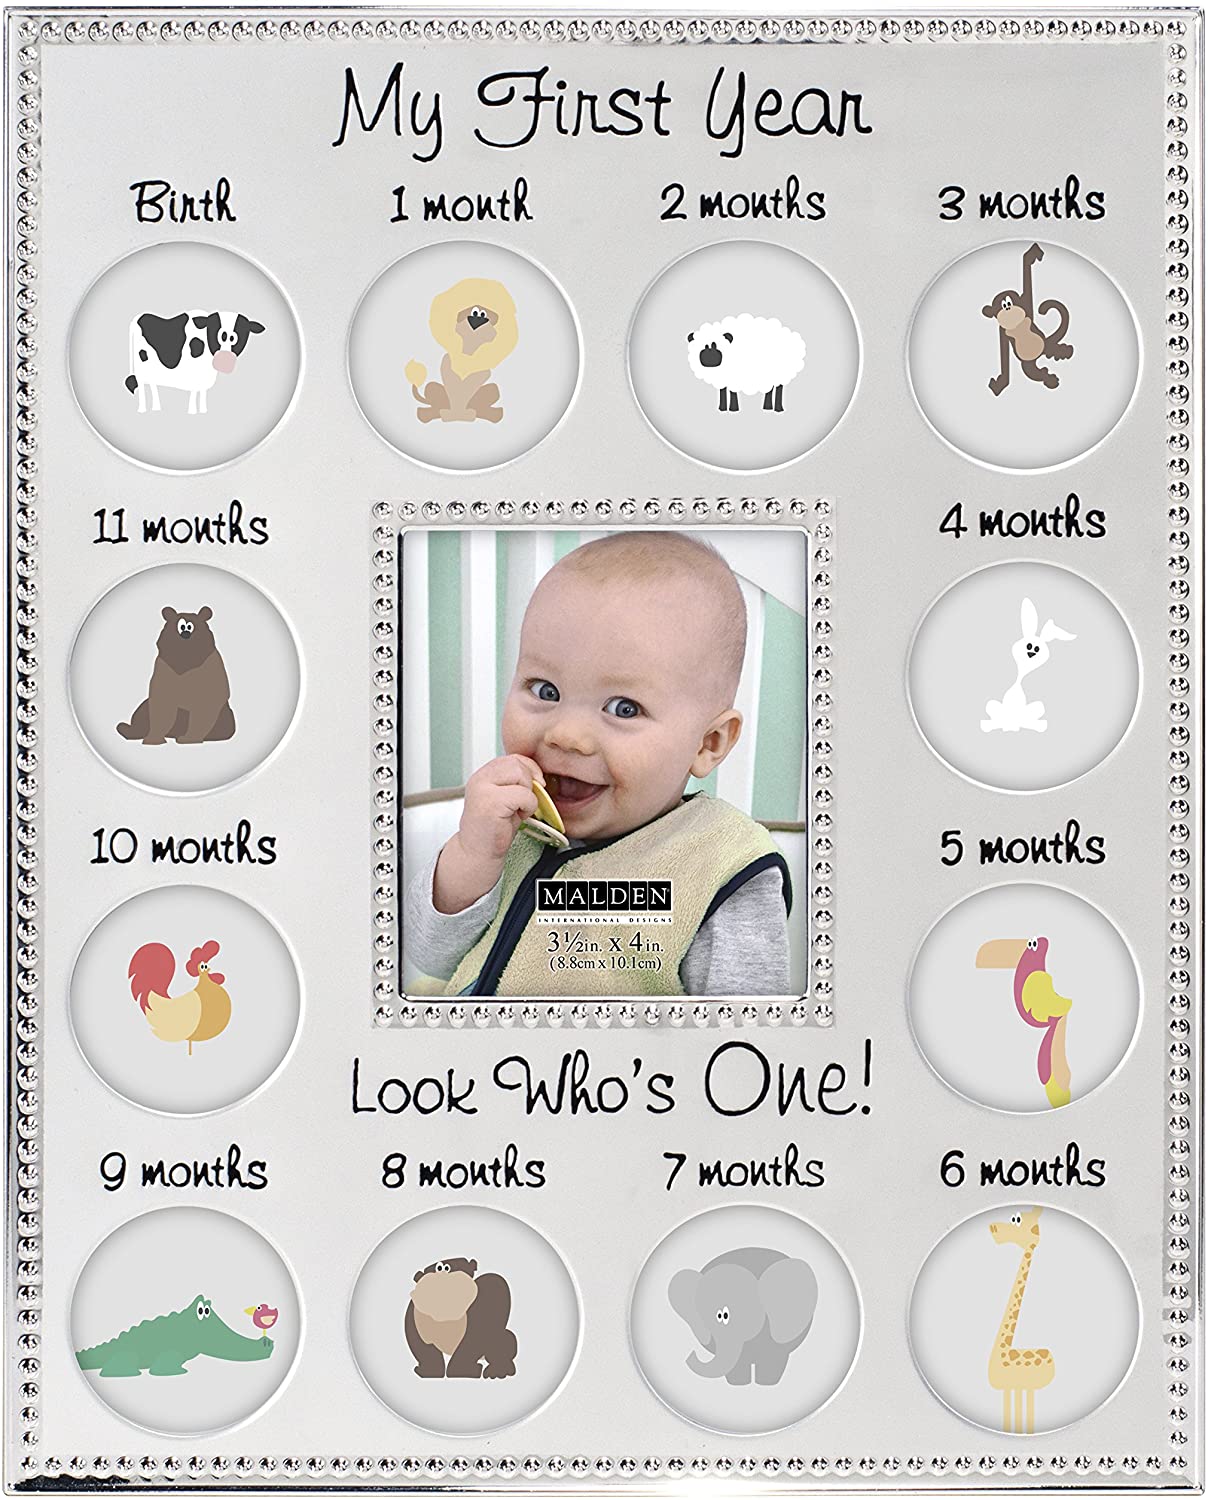 19 Personalized and Sentimental Baby Gift Ideas - FamilyEducation